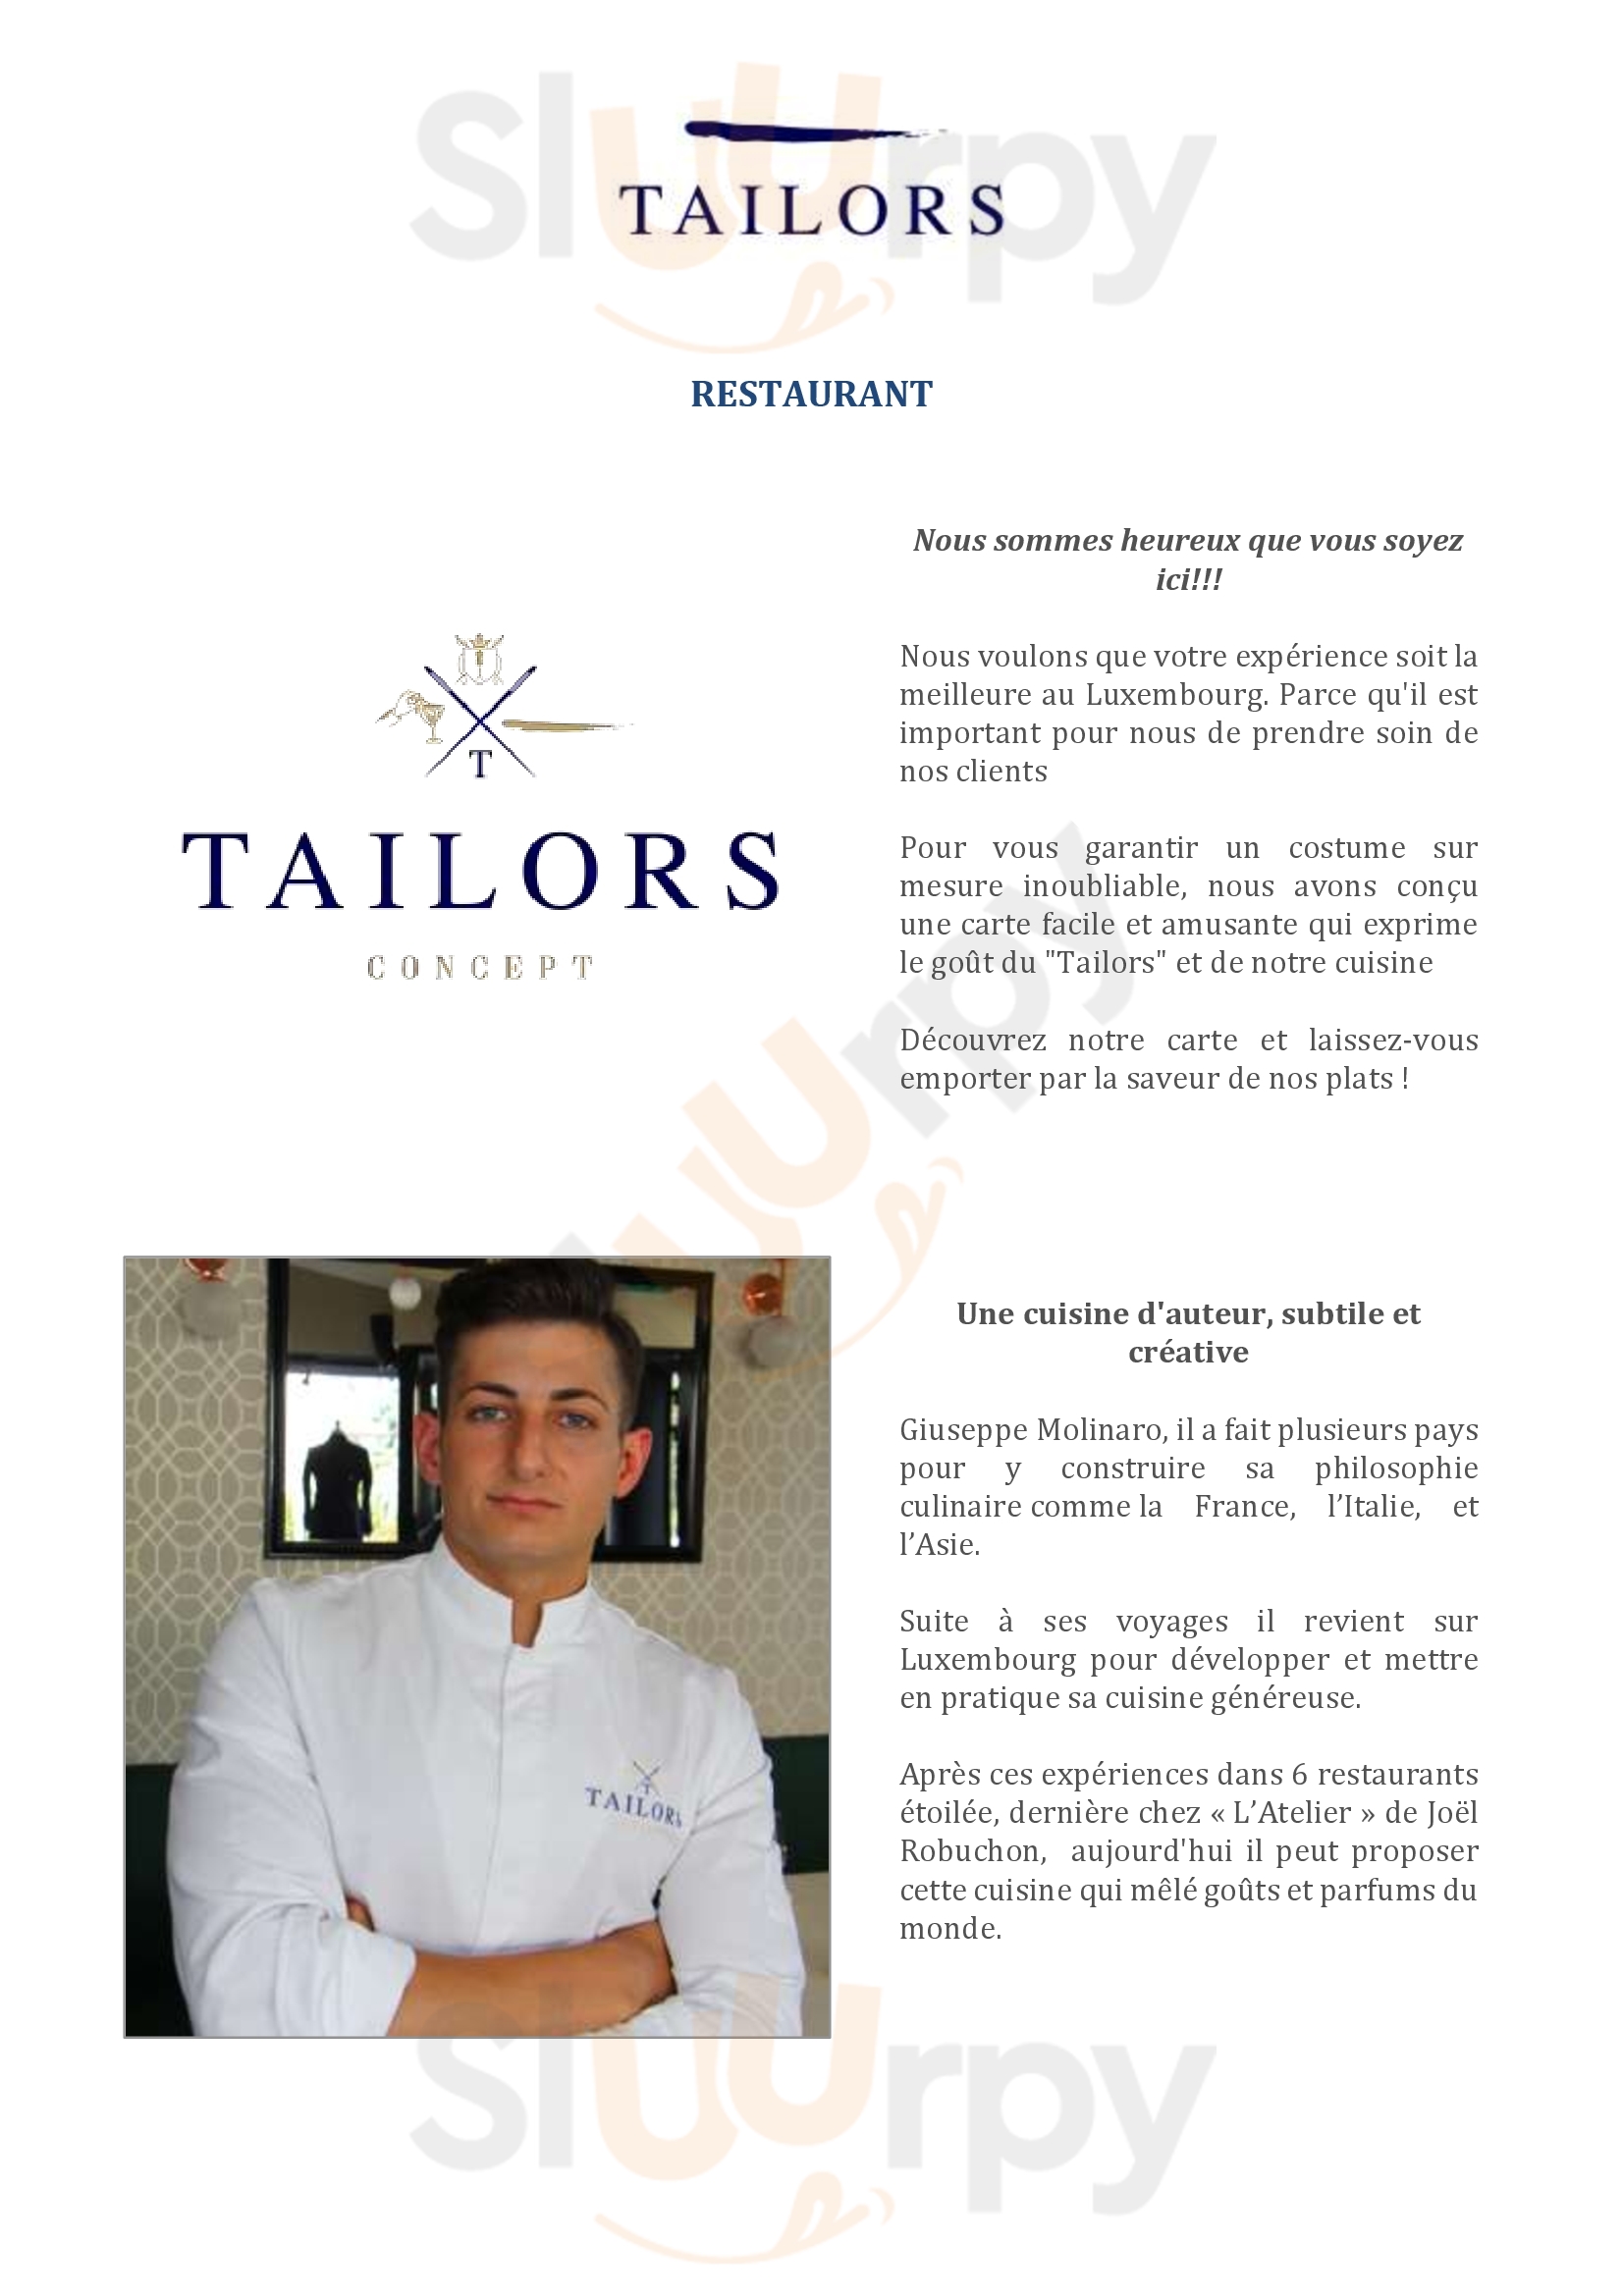 Tailors Concept Luxembourg Menu - 1